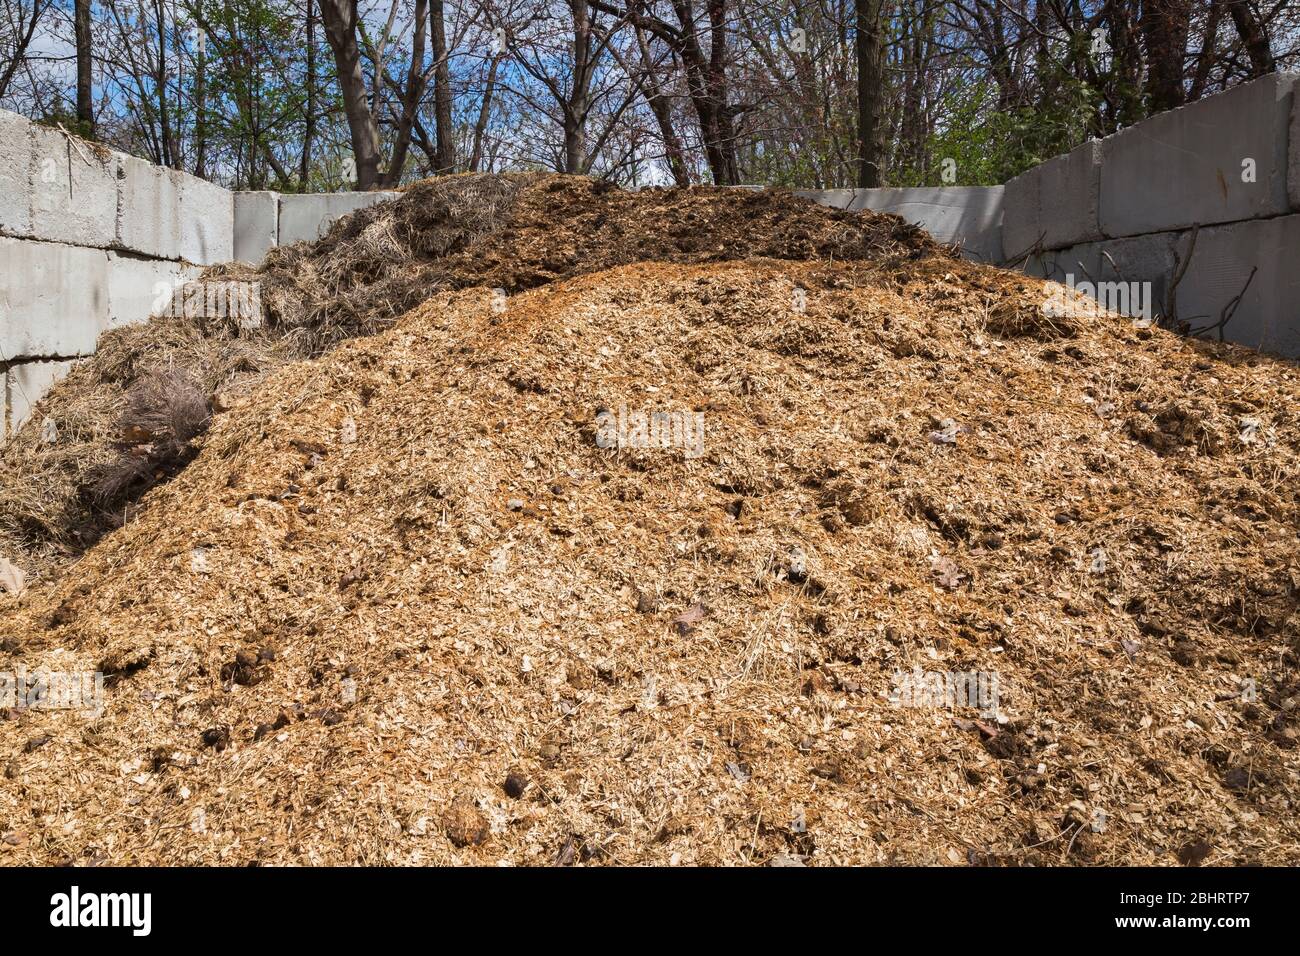 Pile of straw, leaves and woodchips composting in industrial outdoor bin Stock Photo